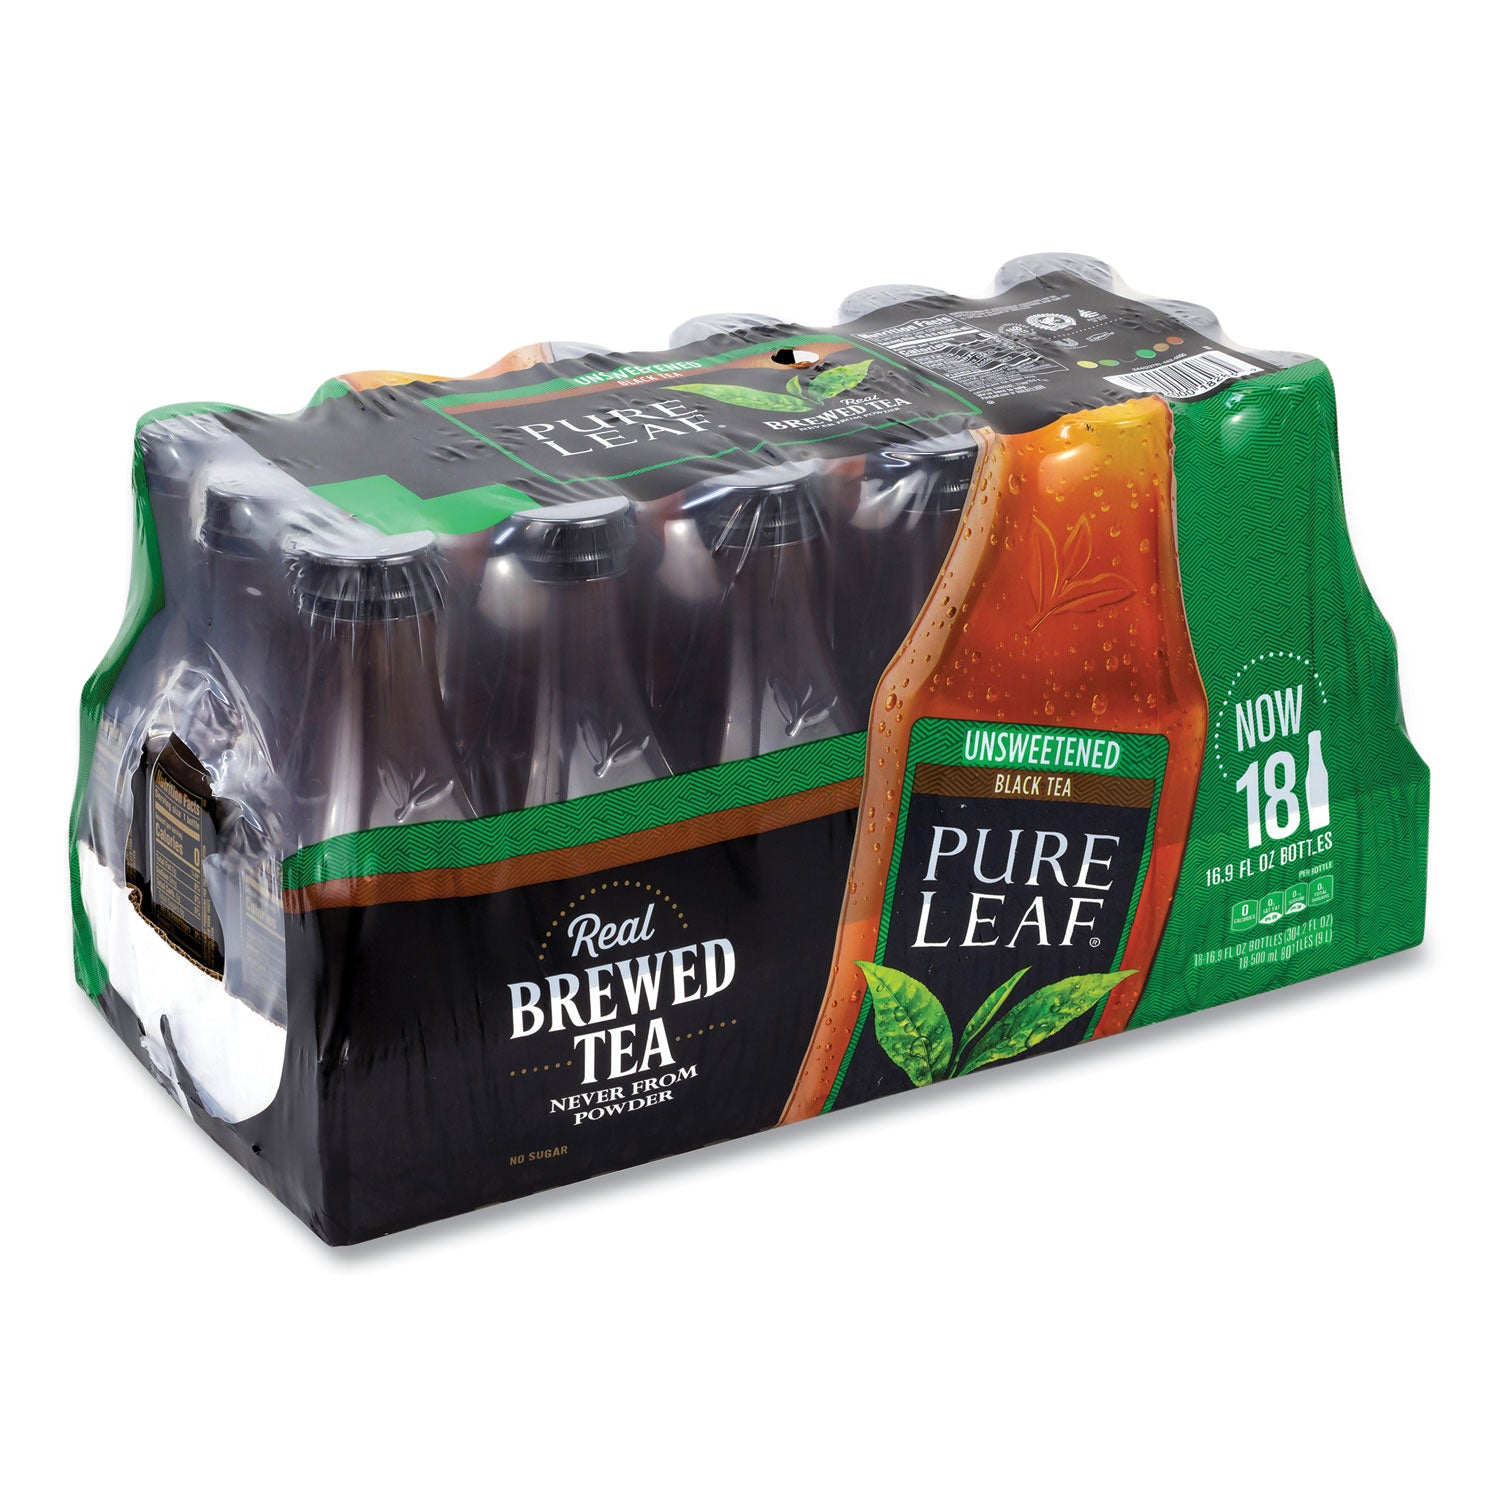 pure-leaf-unsweetened-iced-black-tea-169-oz-bottle-18-carton-ships-in-1-3-business-days_grr22002027 - 4